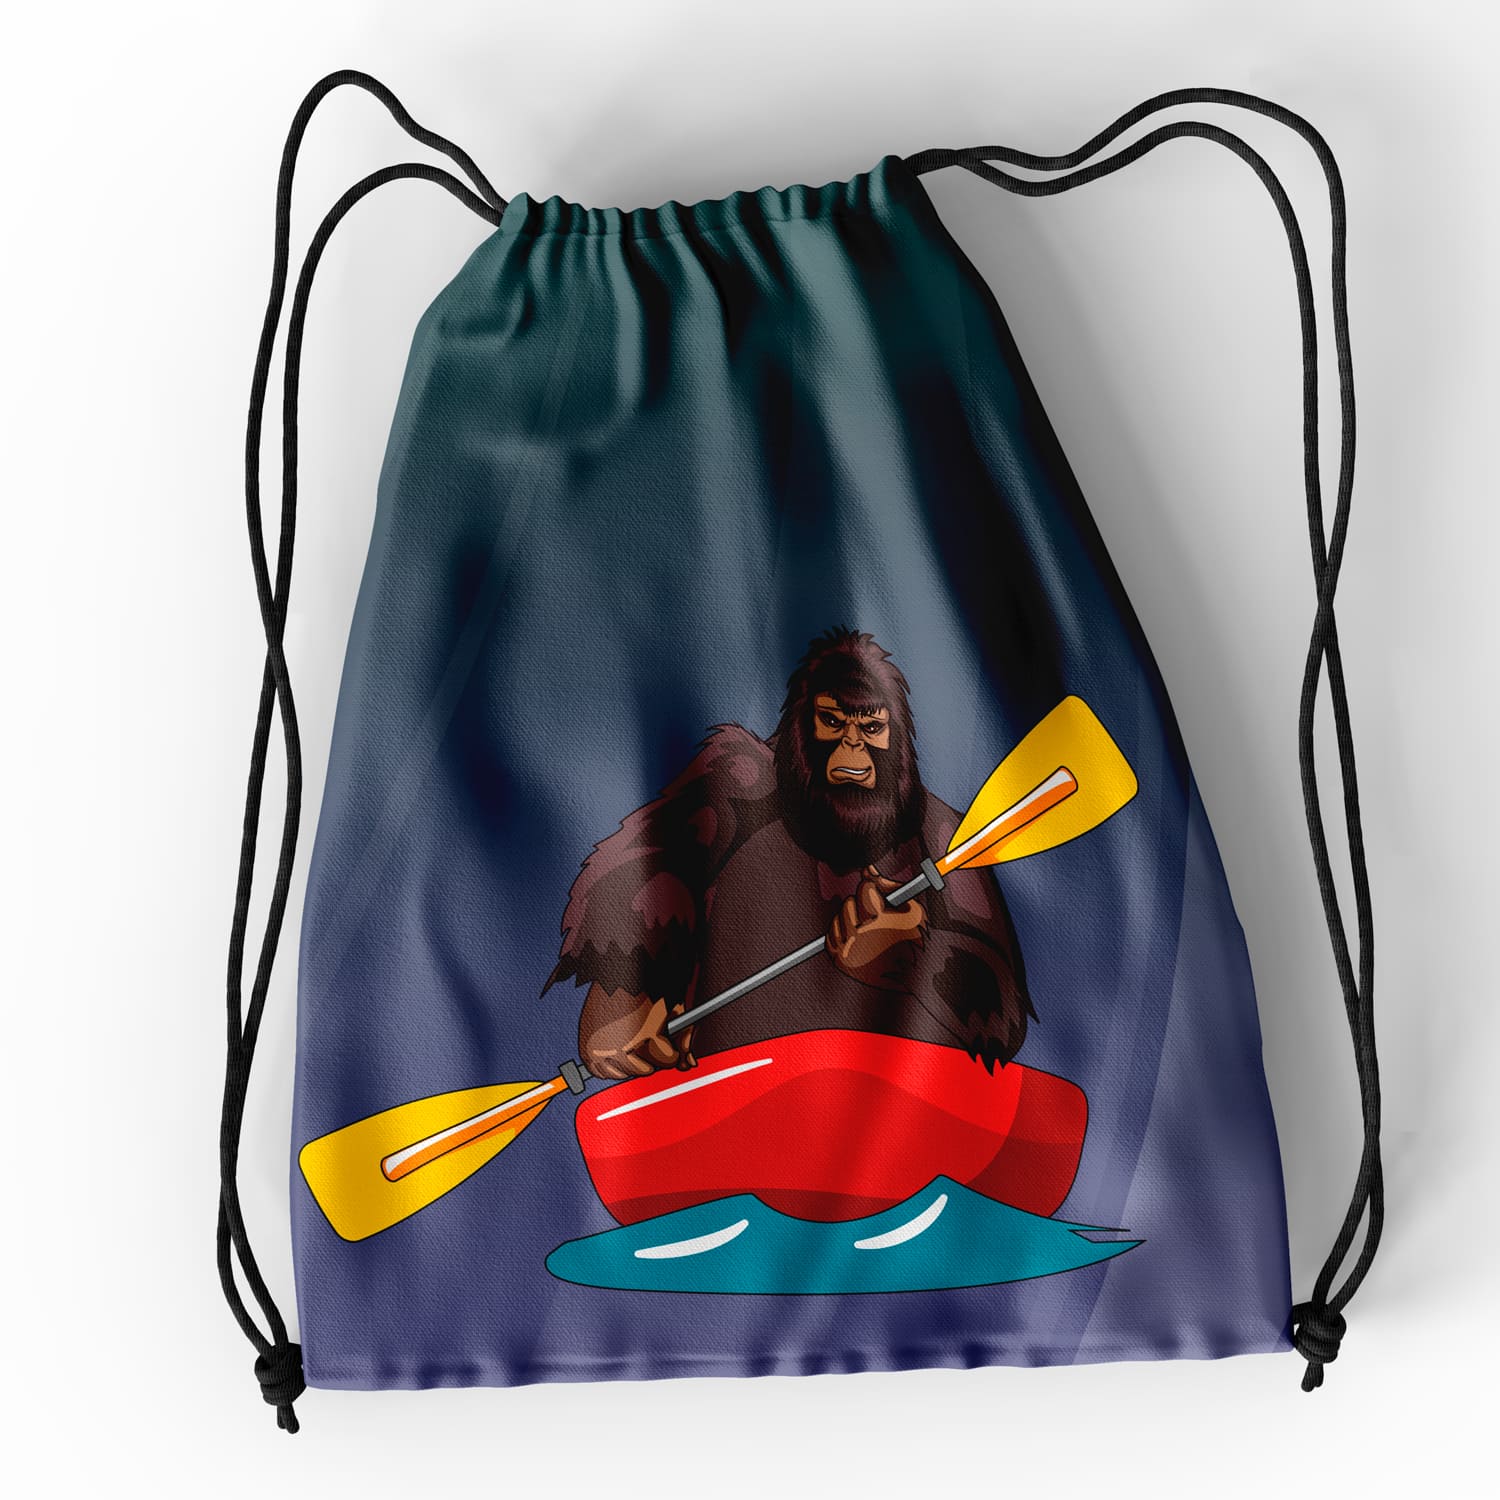 Drawstring bag with a picture of a gorilla on a kayak.